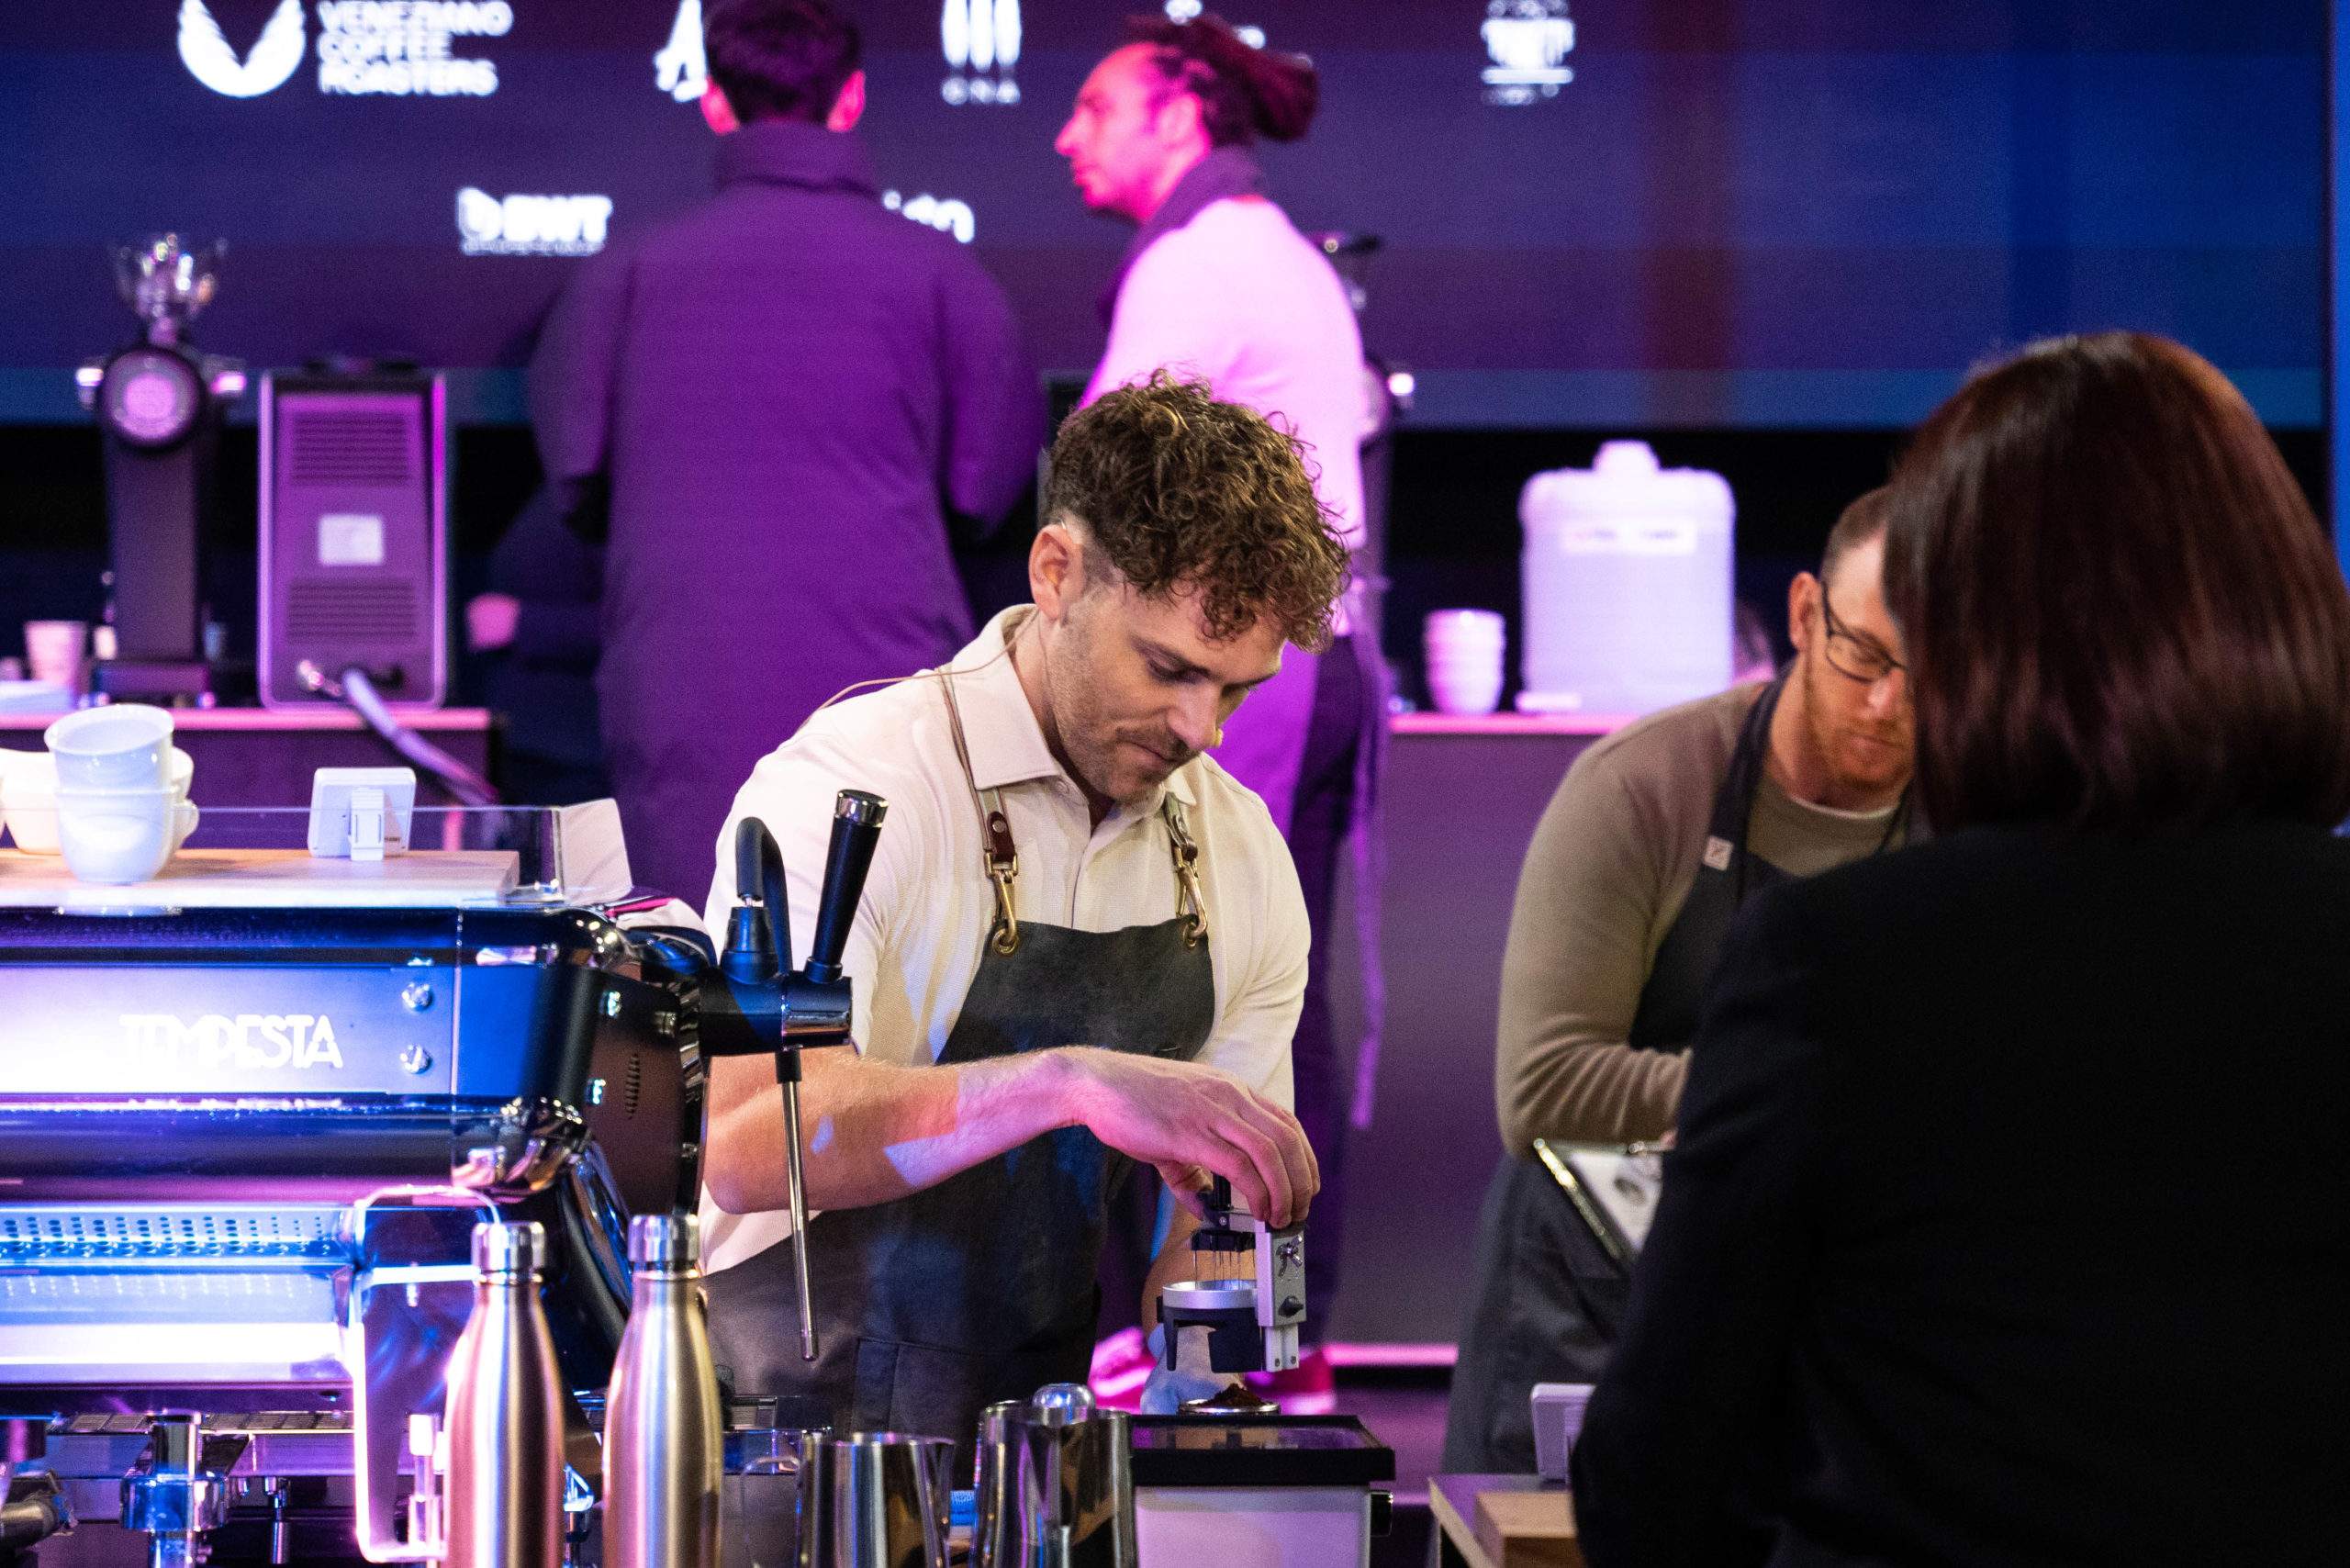 A Melbourne Barista Has Just Been Named Australia's Coffee-Making Champion for 2023